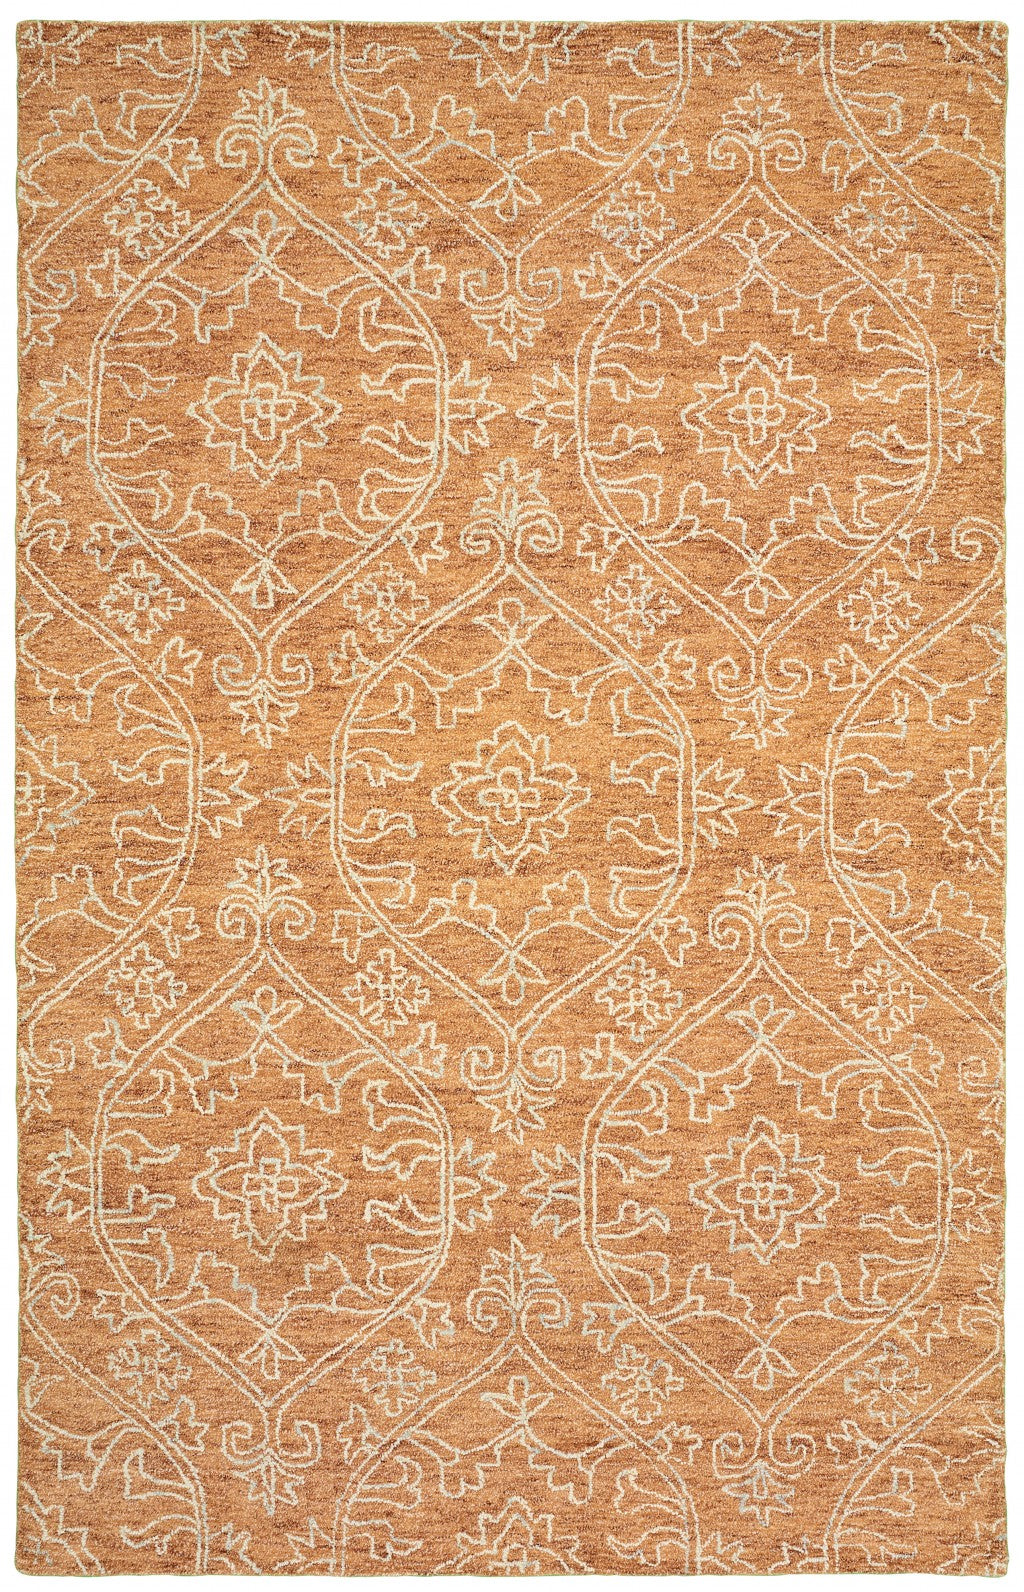 8’ x 10’ Rustic Floral Paradise Area Rug